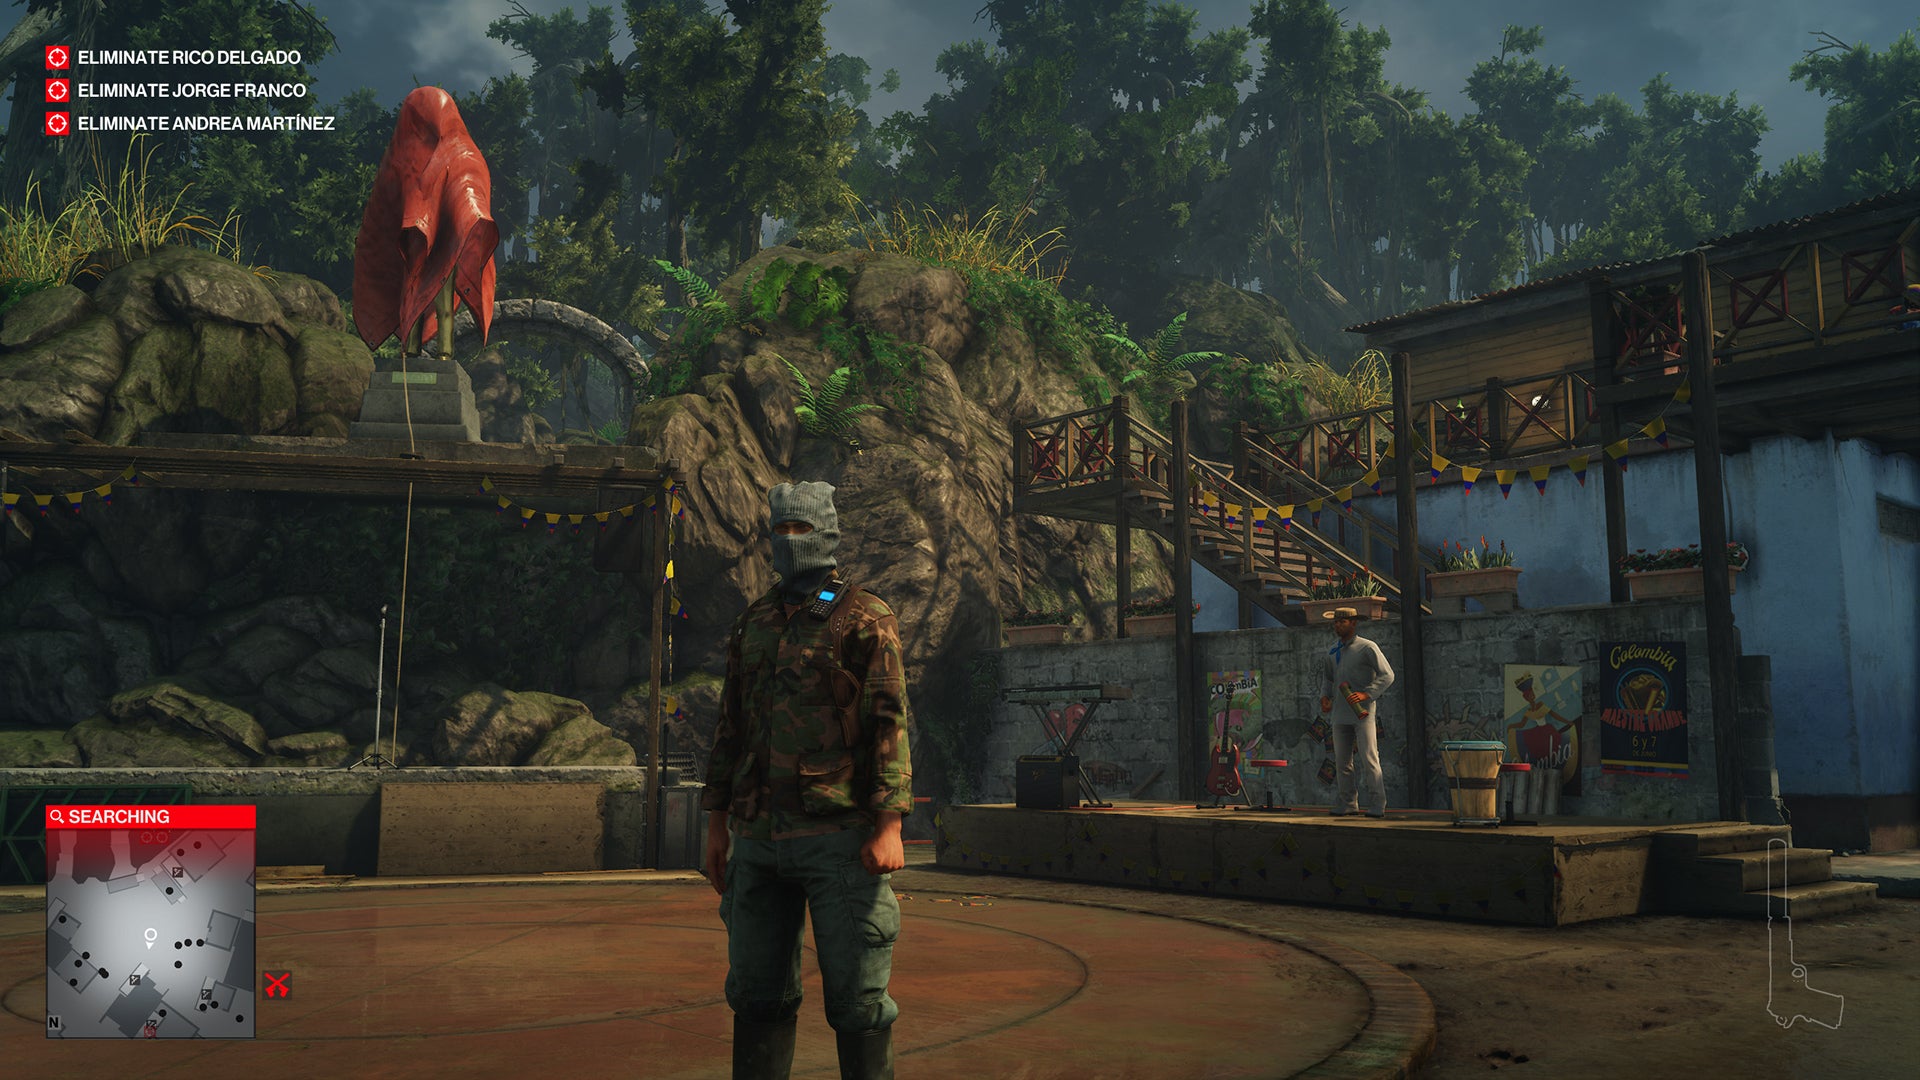 Ian Hitman in the Santa Fortuna level of Hitman 2. He is wearing camouflage combats and a balaclava, and is in a small town square in front of a stage, surrounded by jungle plants.